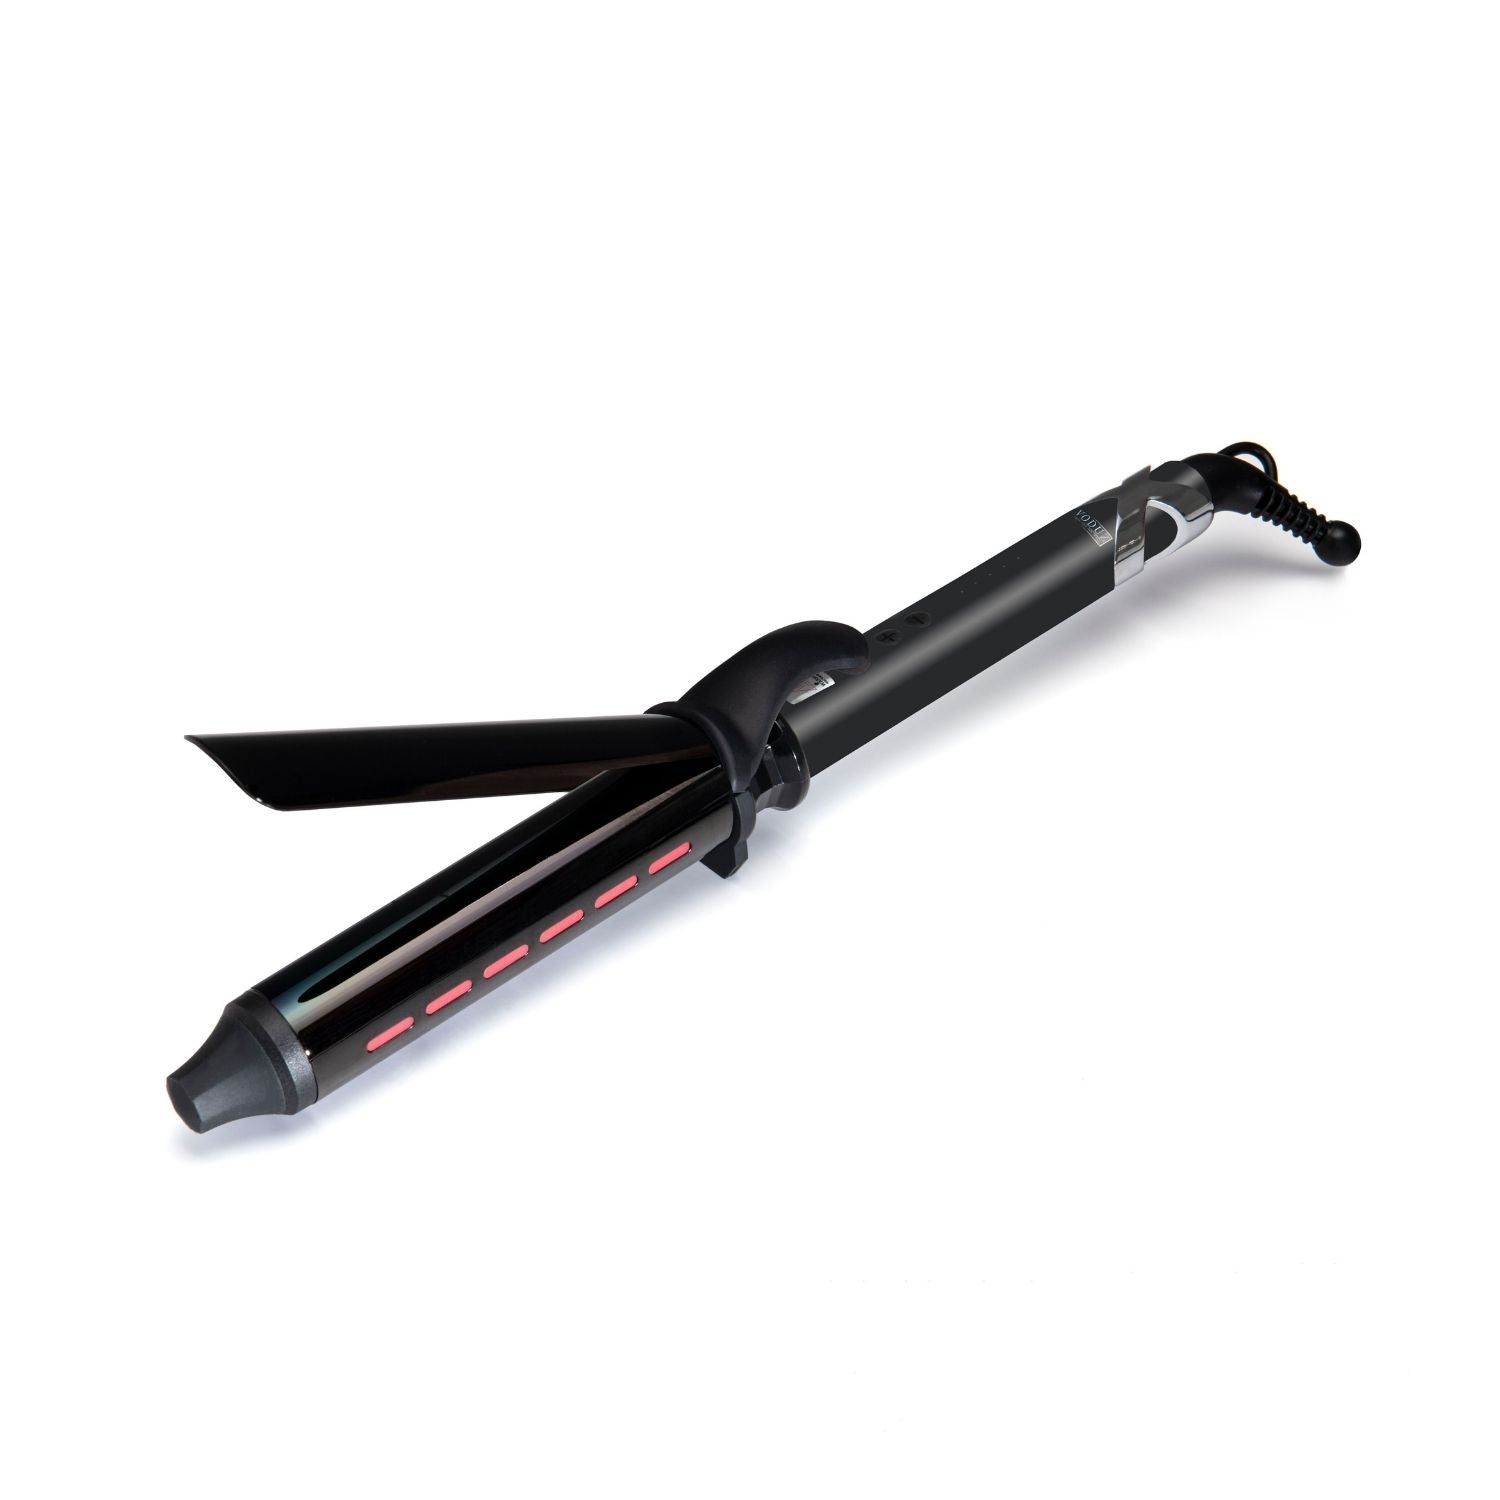 Voduz Sceptre Infrared Curling Tong 2 Shaws Department Stores